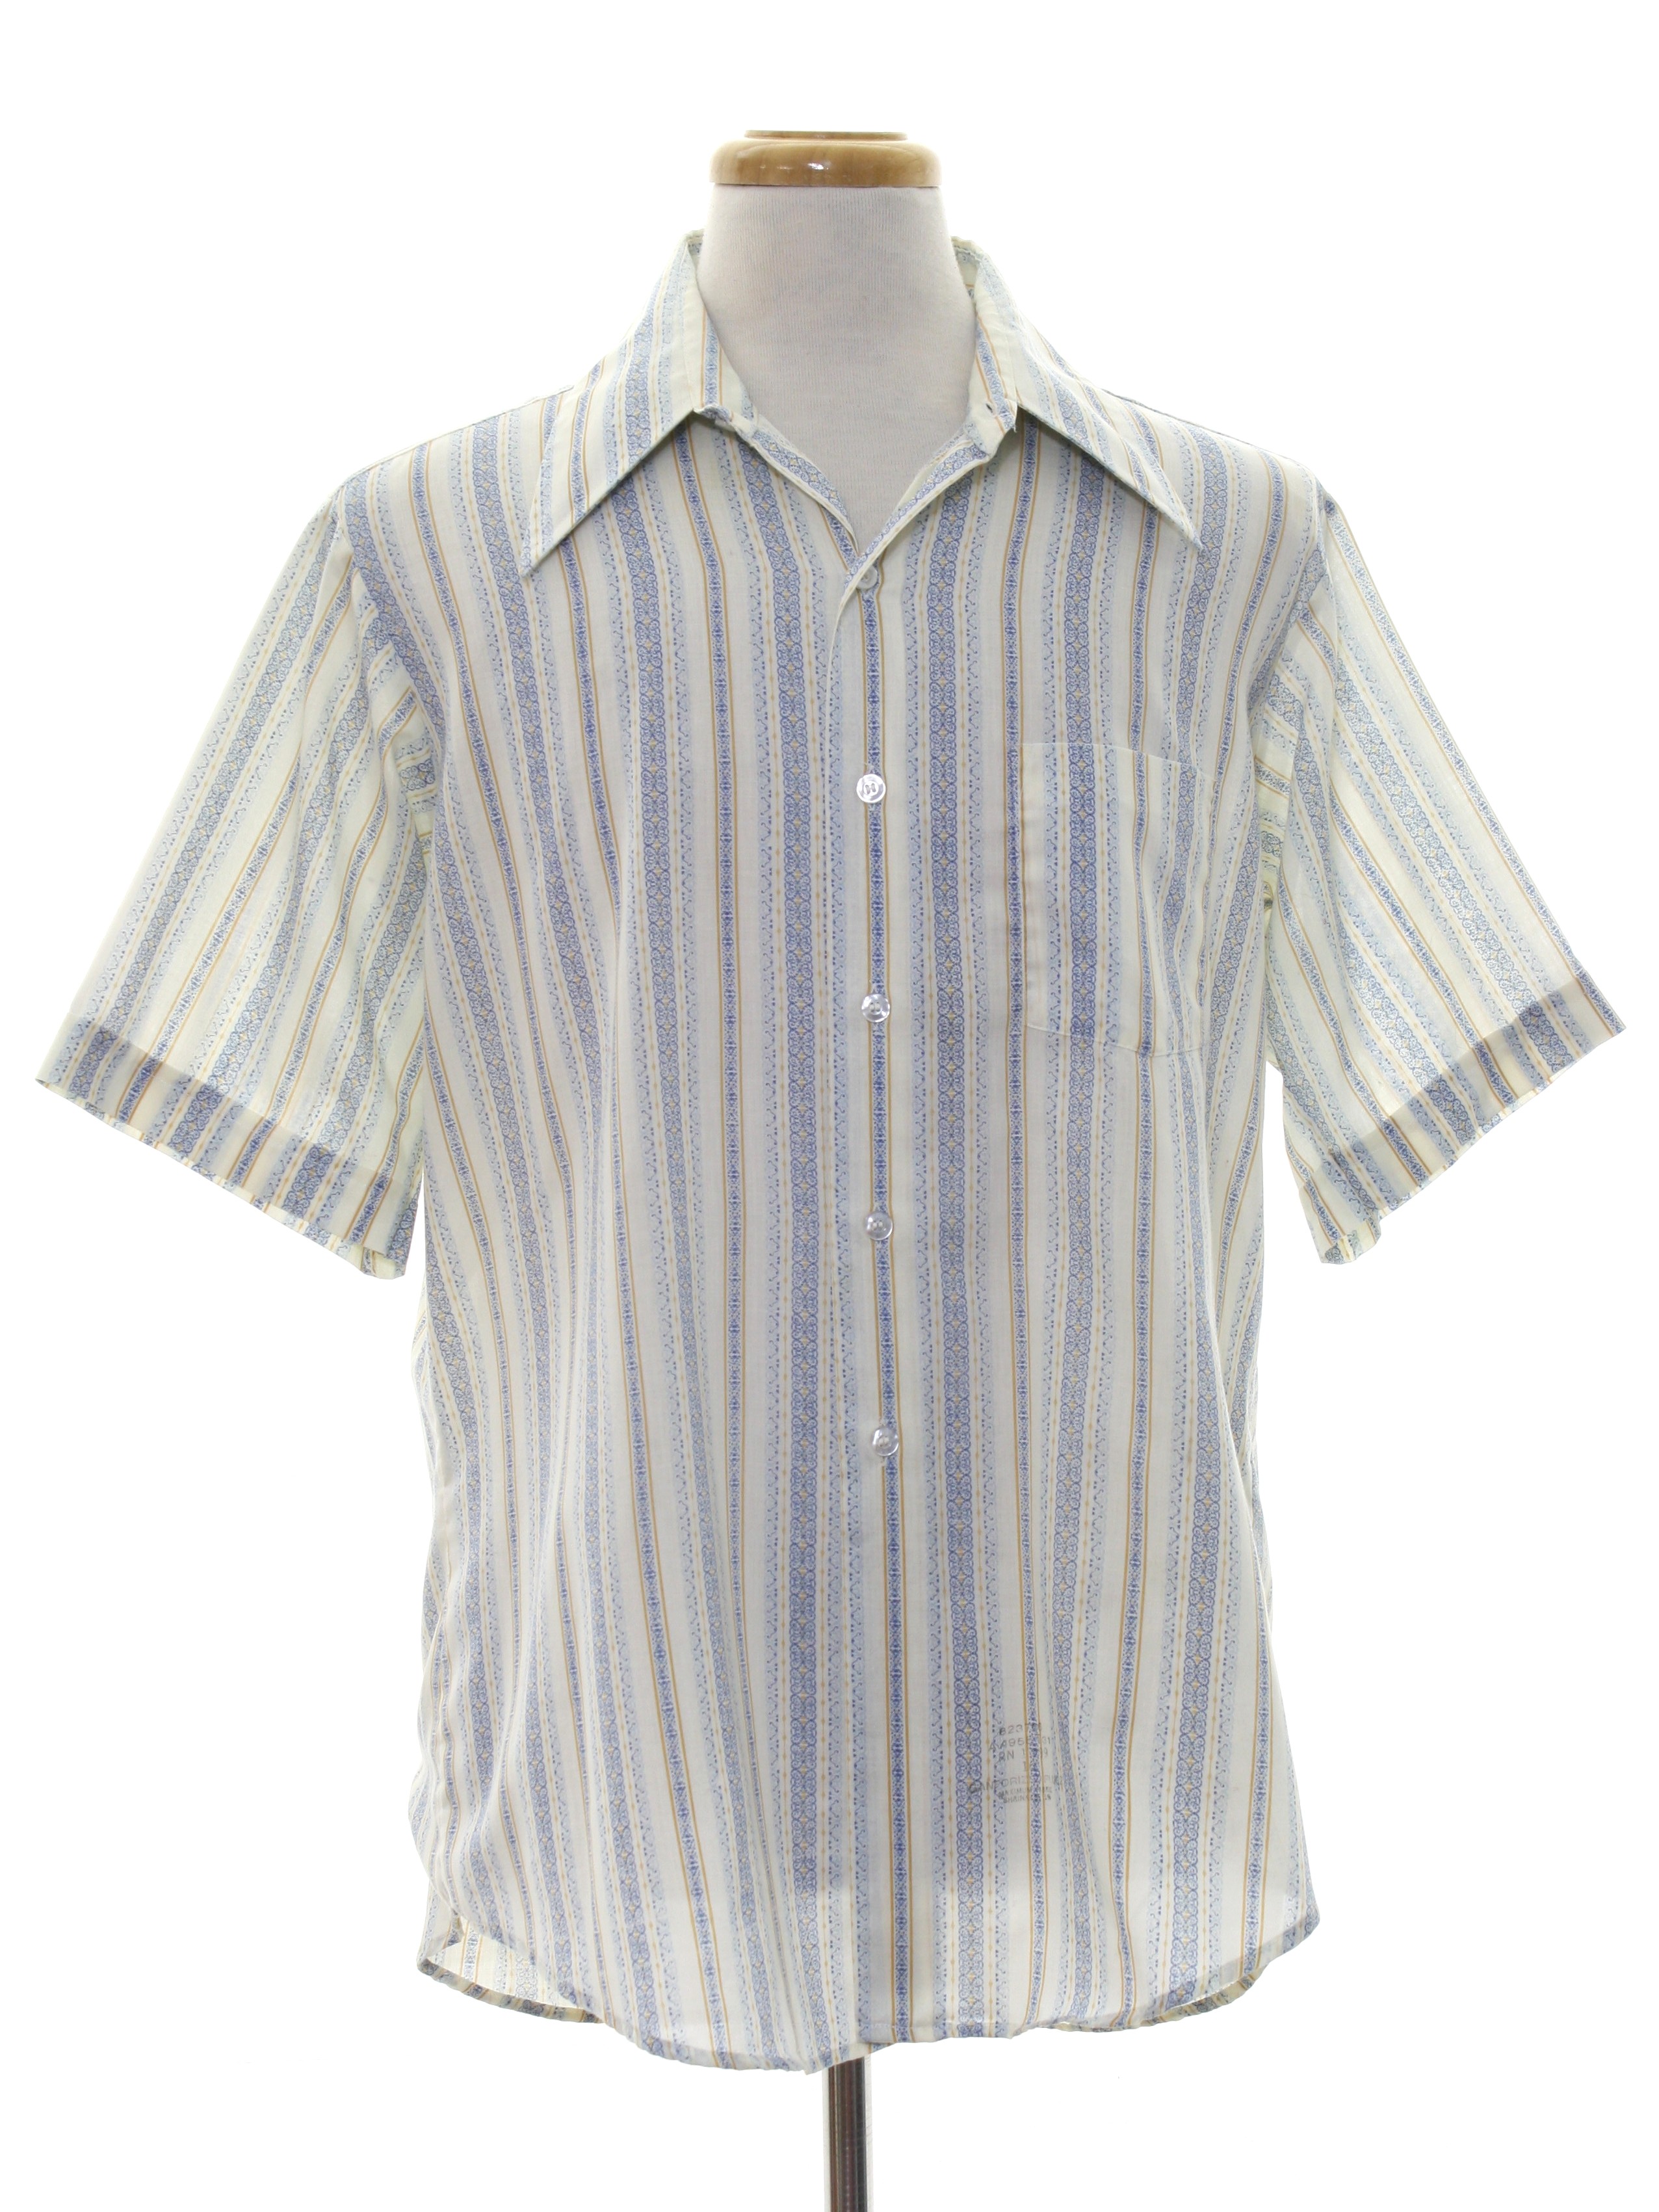 Sixties Vintage Shirt: Late 60s -Royal Knight- Mens white background ...